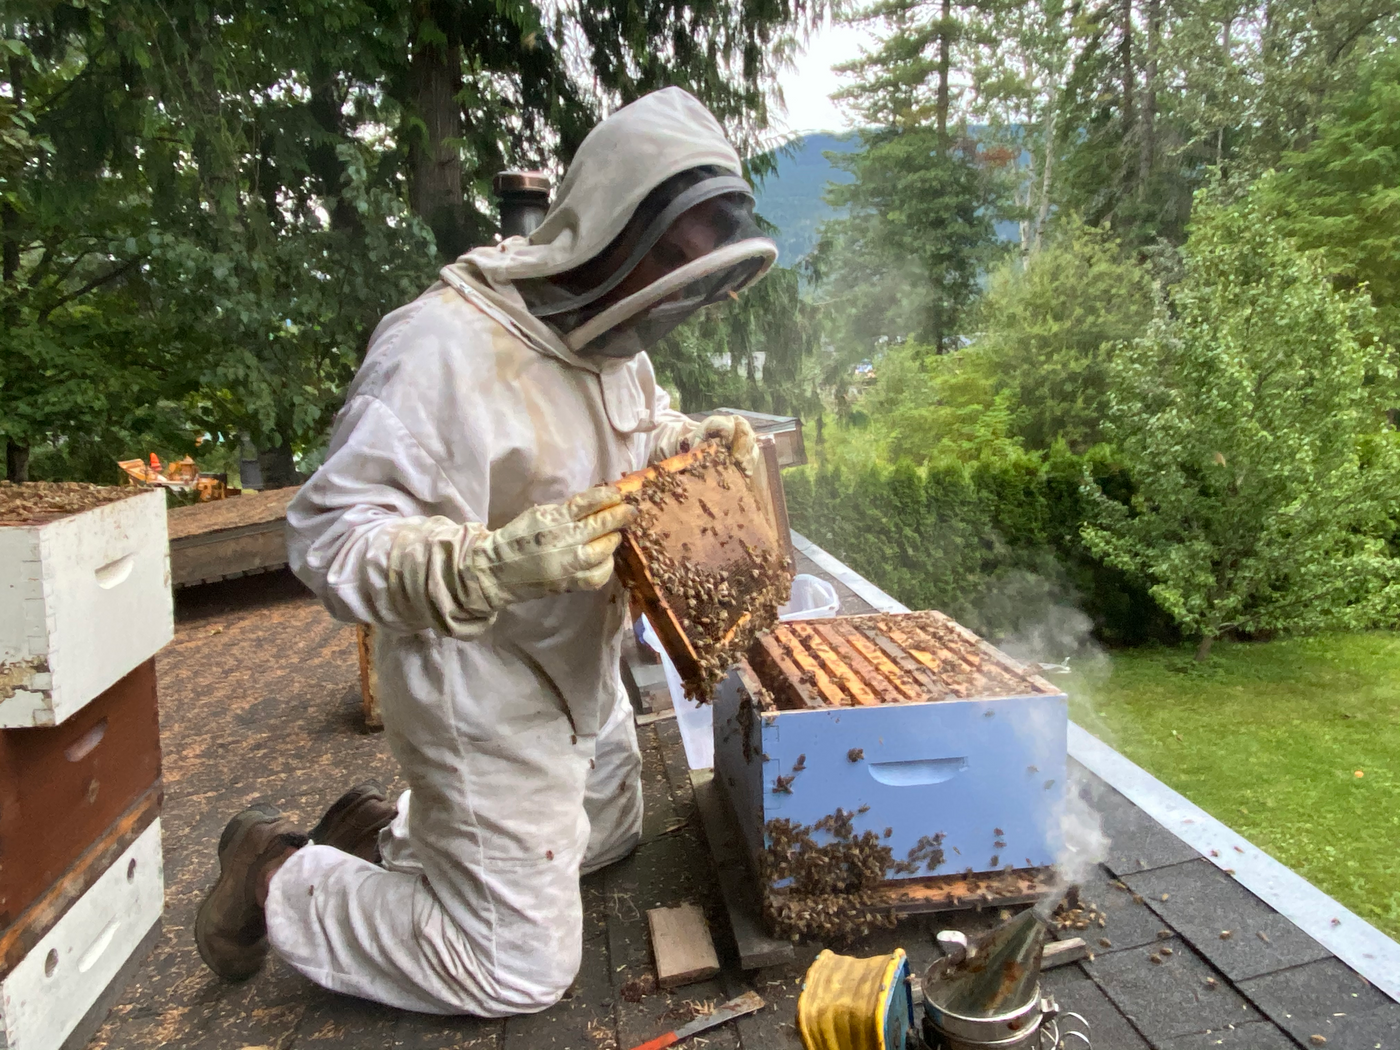 Learn about beekeeping